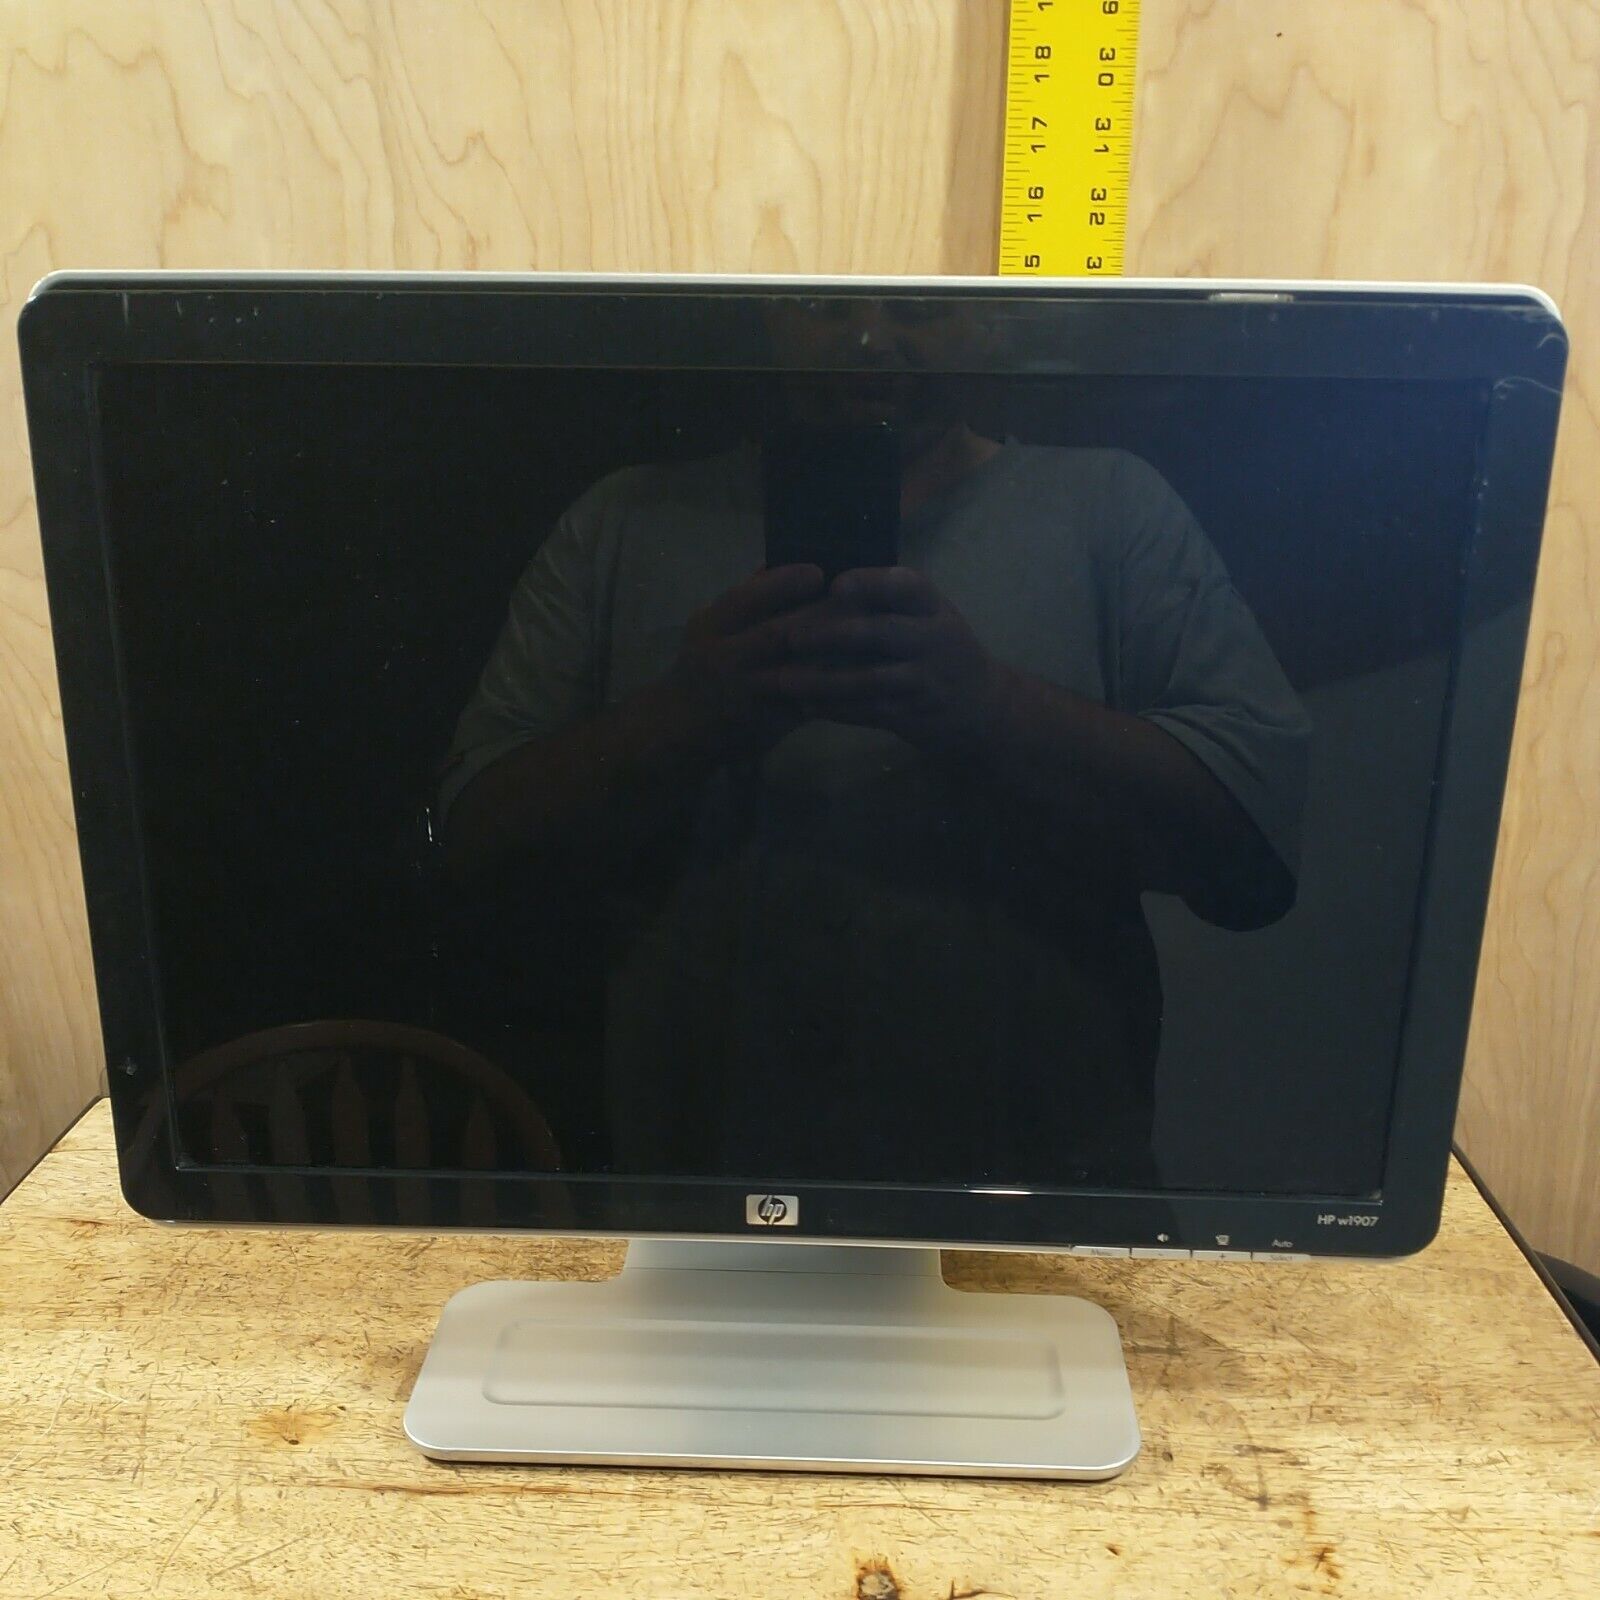 USED HP W1907 19 In. LCD Monitor 60HZ with cables